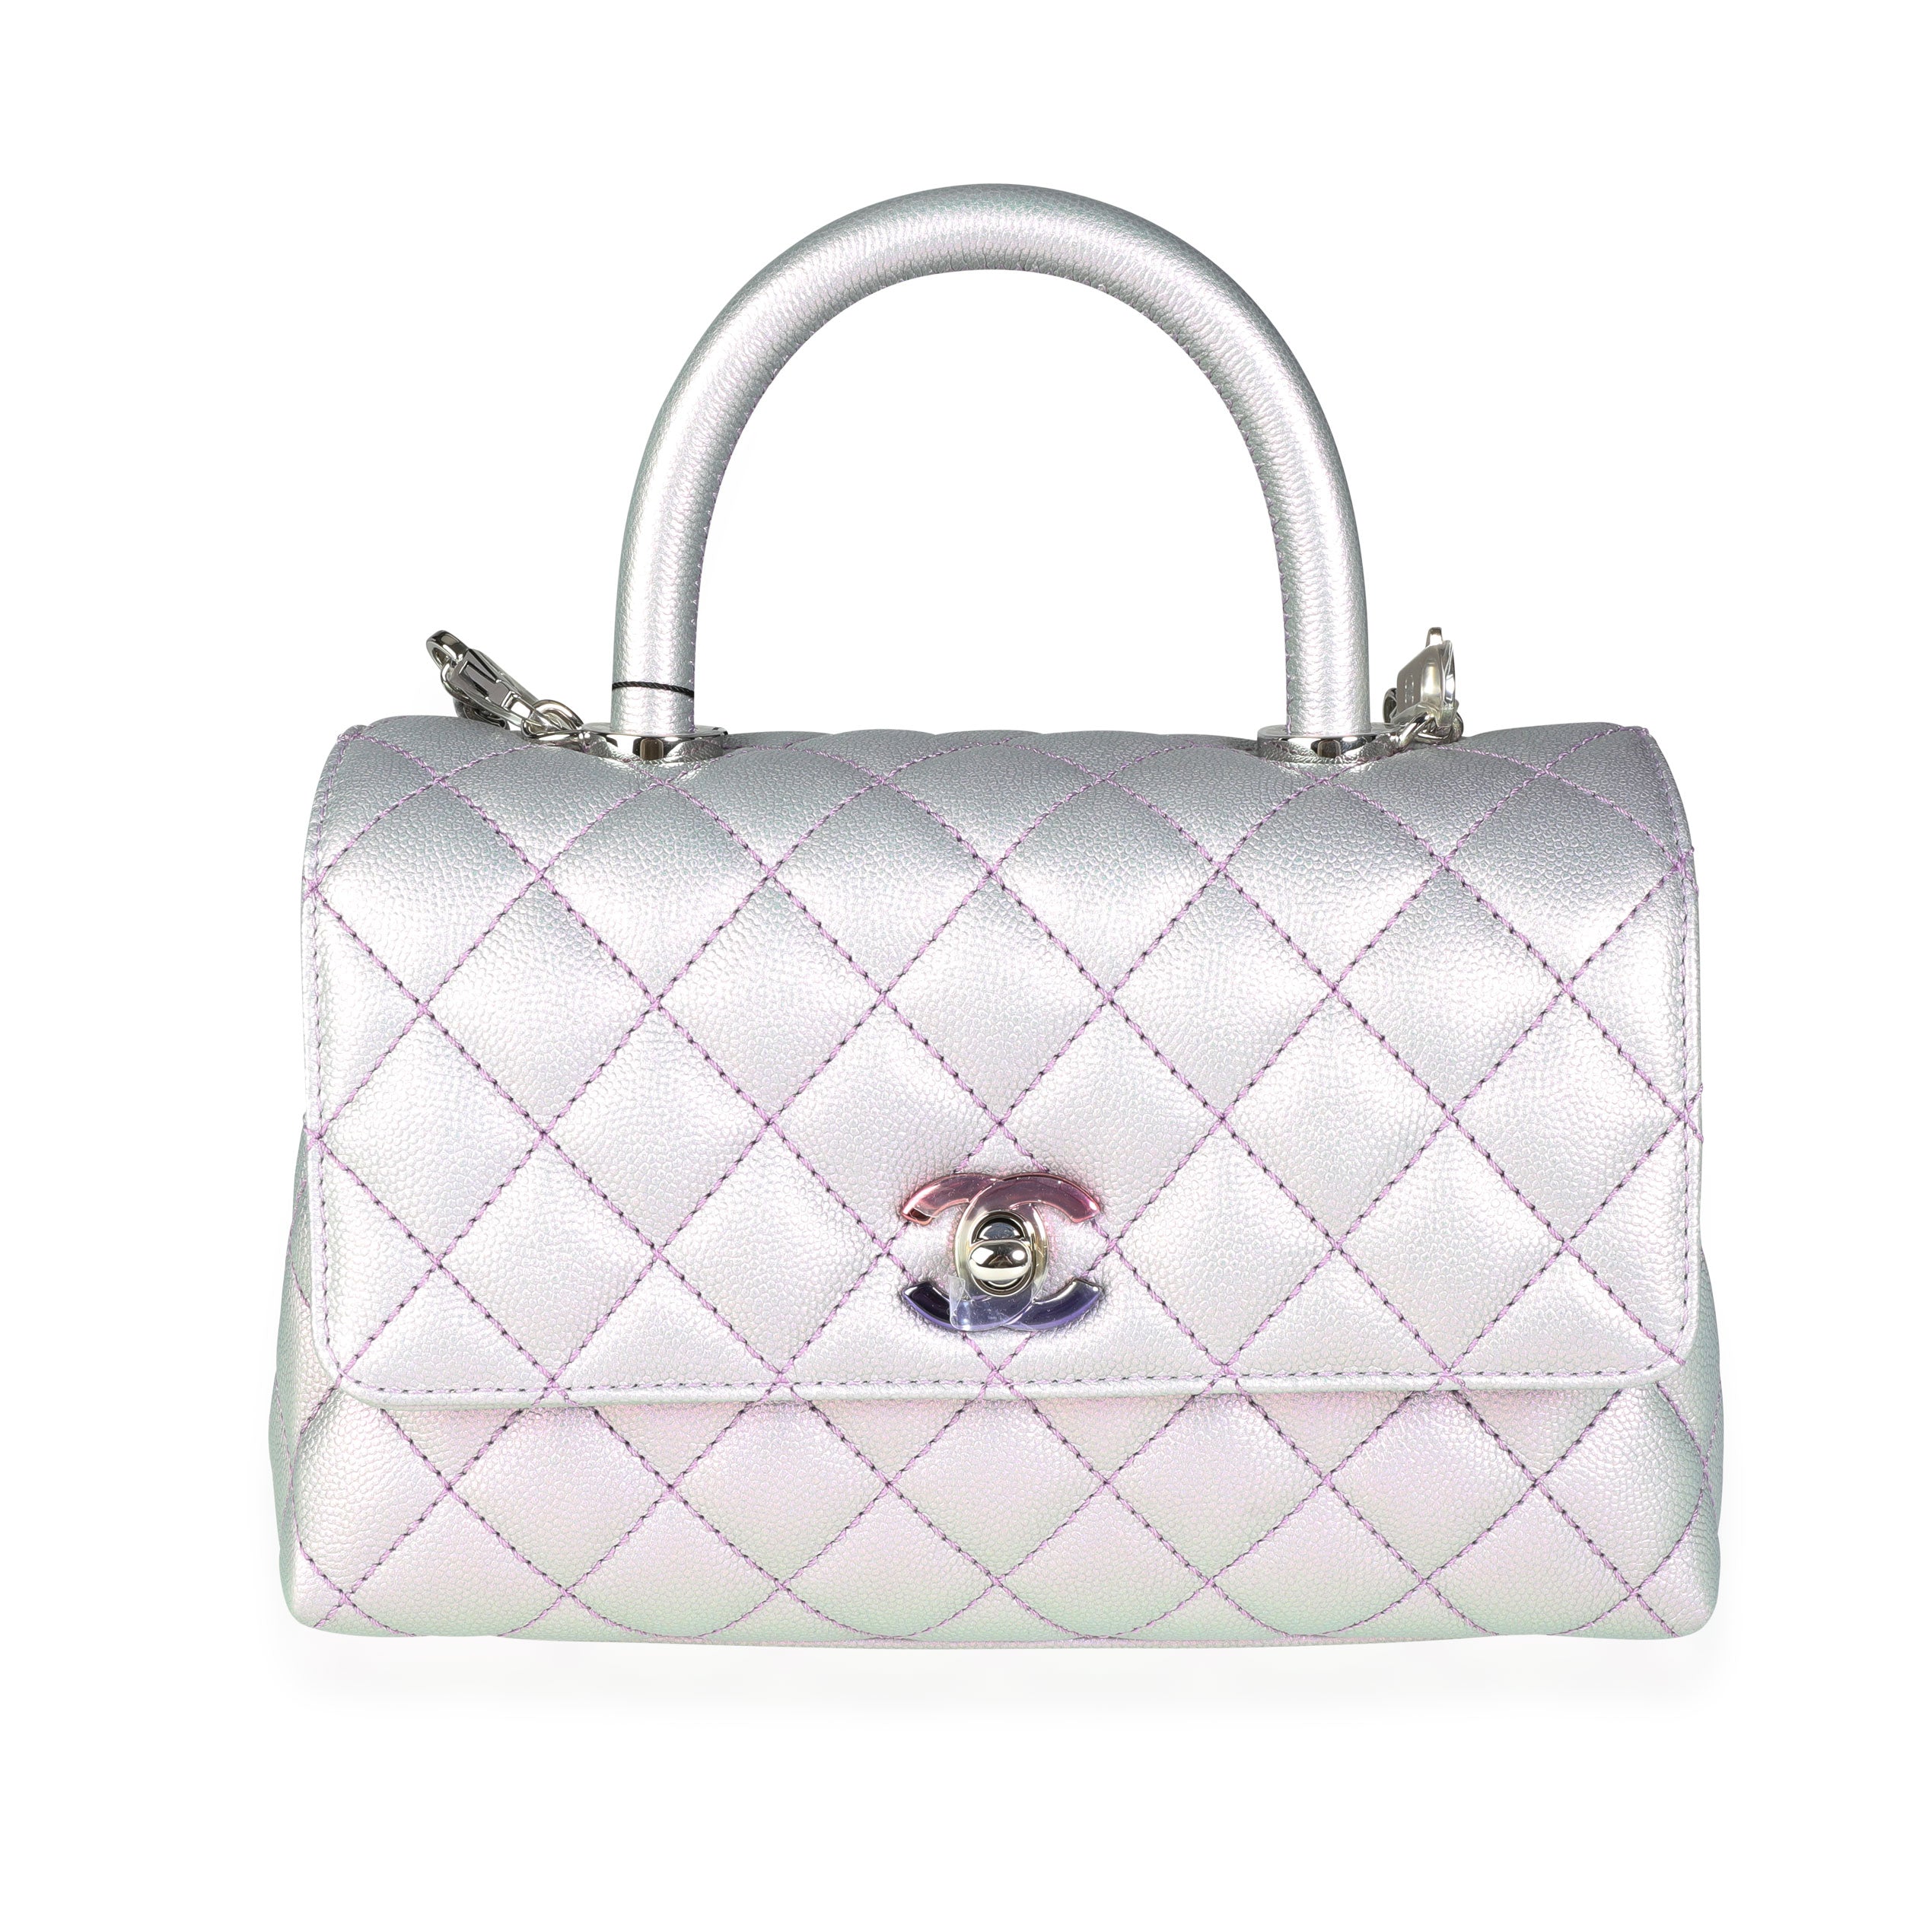 Chanel Light Purple Iridescent Quilted Caviar Small Coco Top Handle Bag